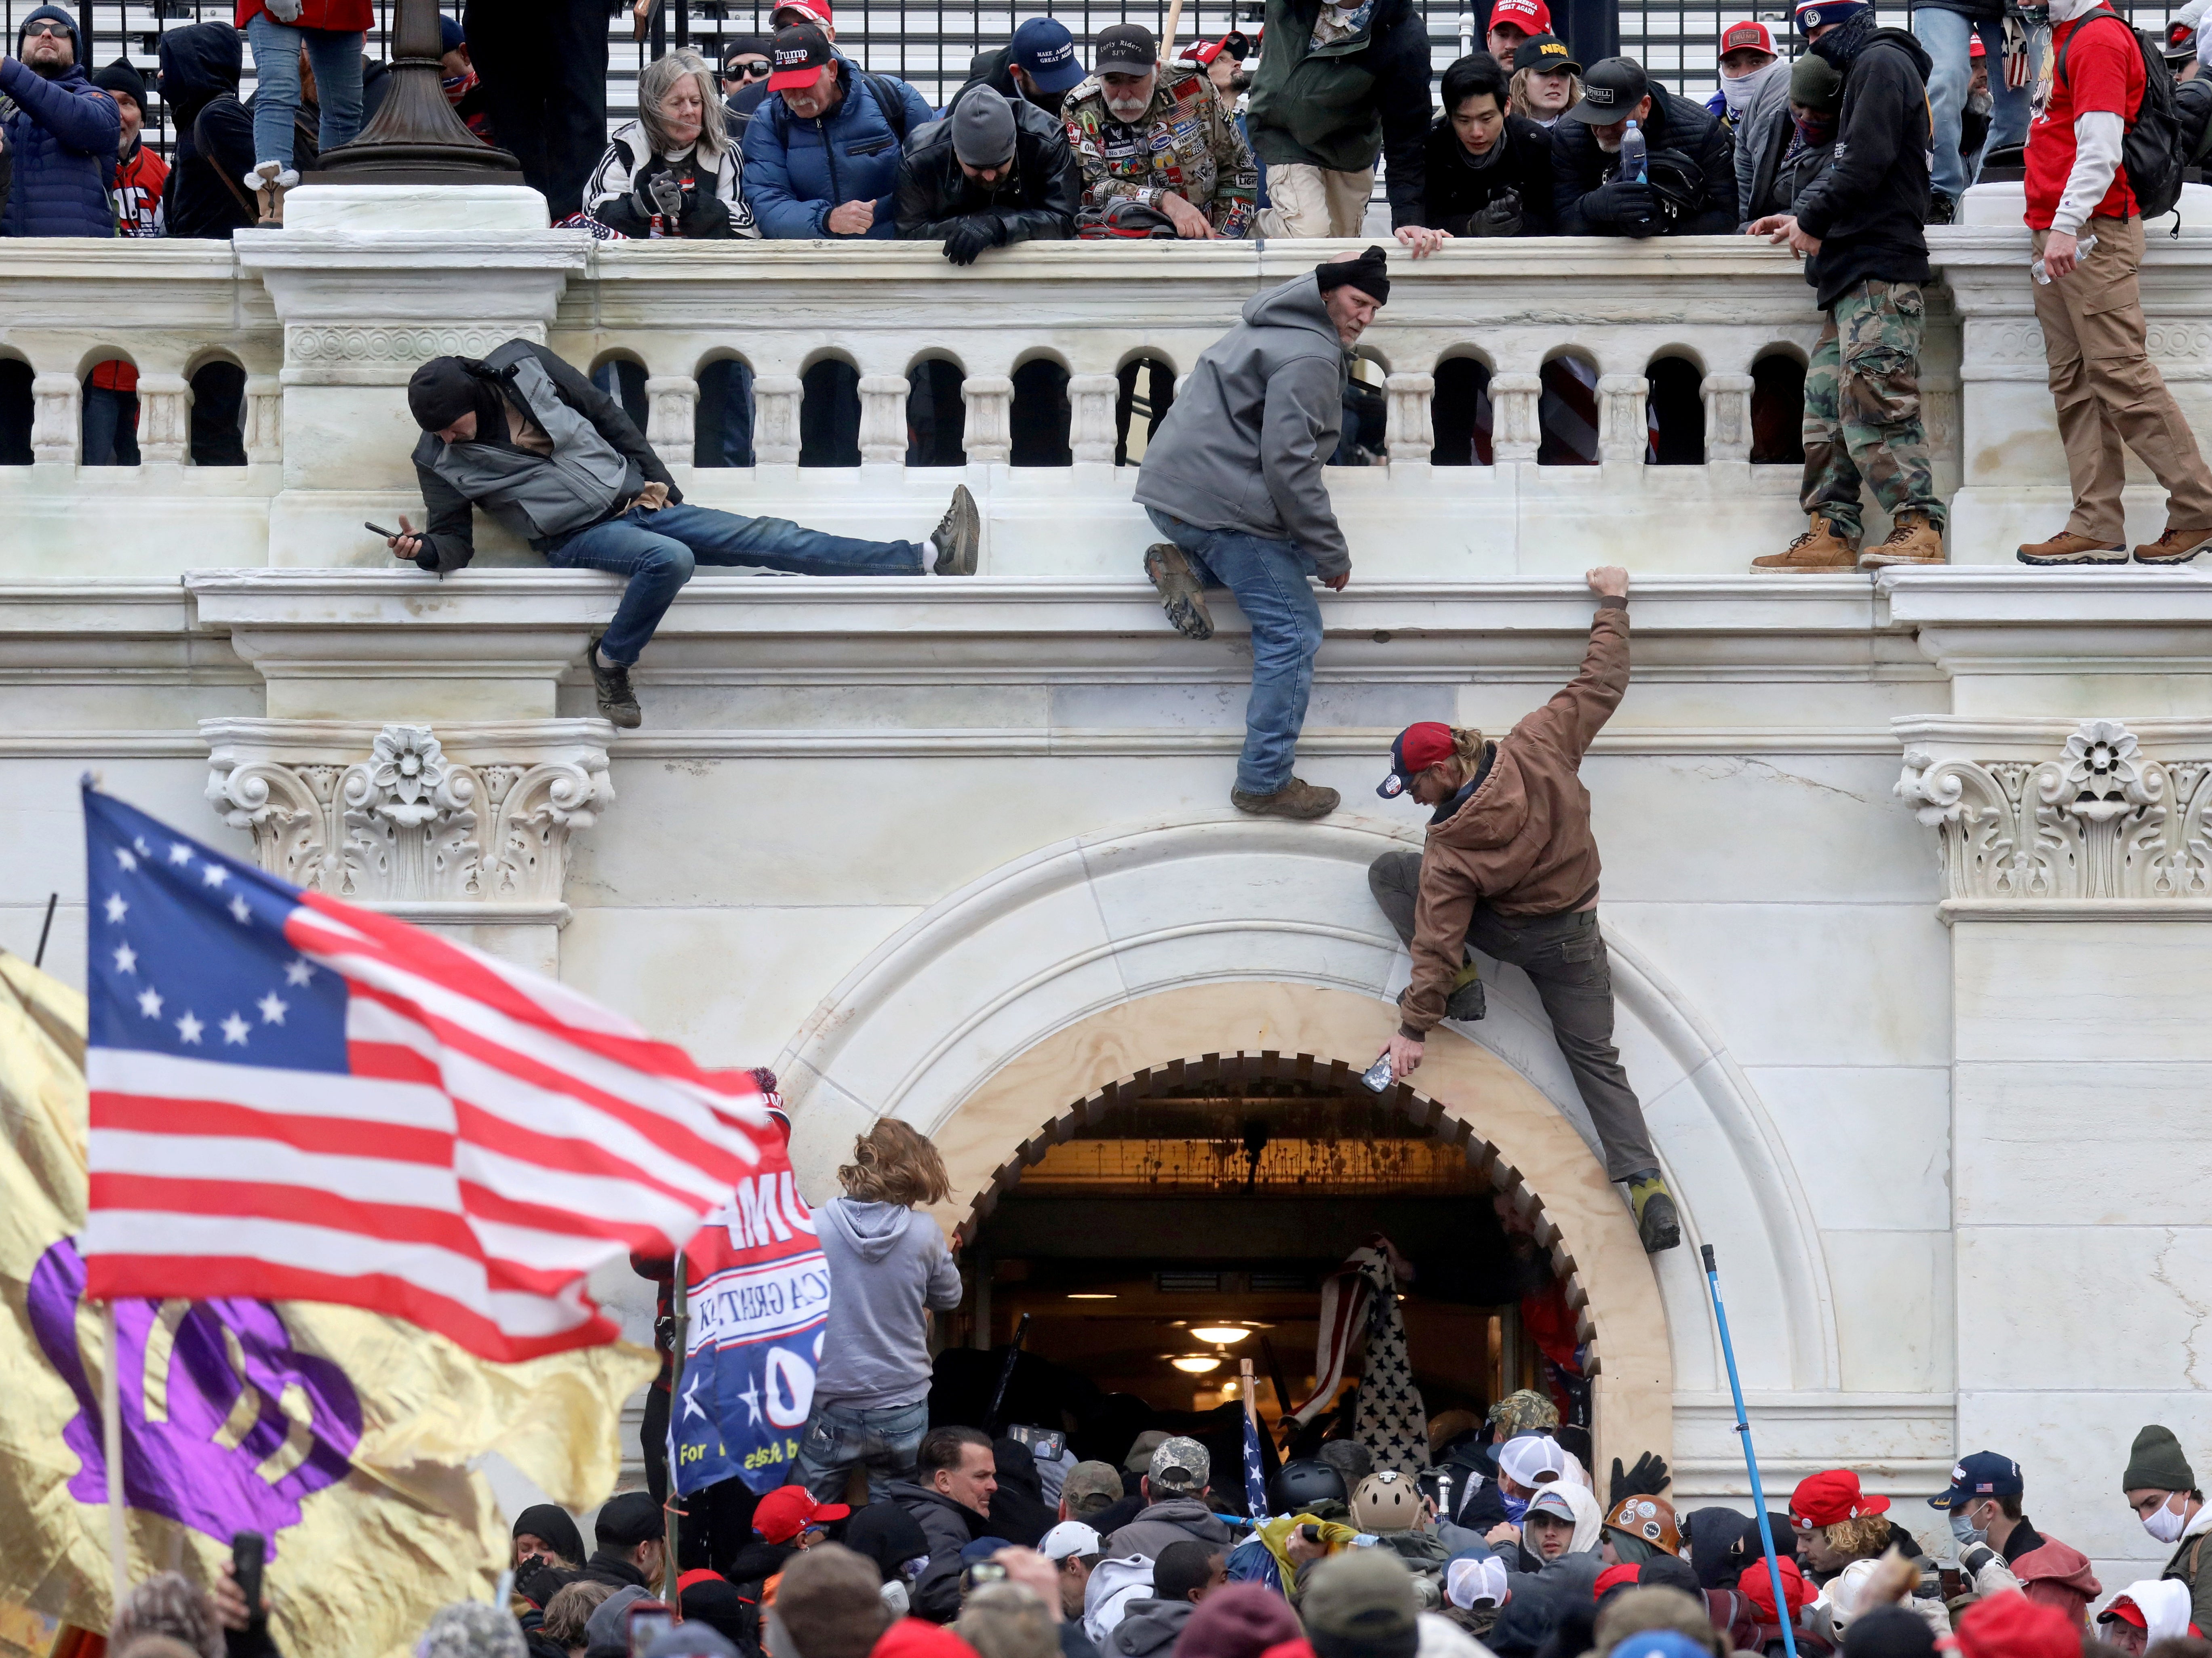 A mob of supporters of former U.S. President Donald Trump fight with members of law enforcement at a door they broke open as they storm the US Capitol Building in Washington, DC, on 6 January 2021